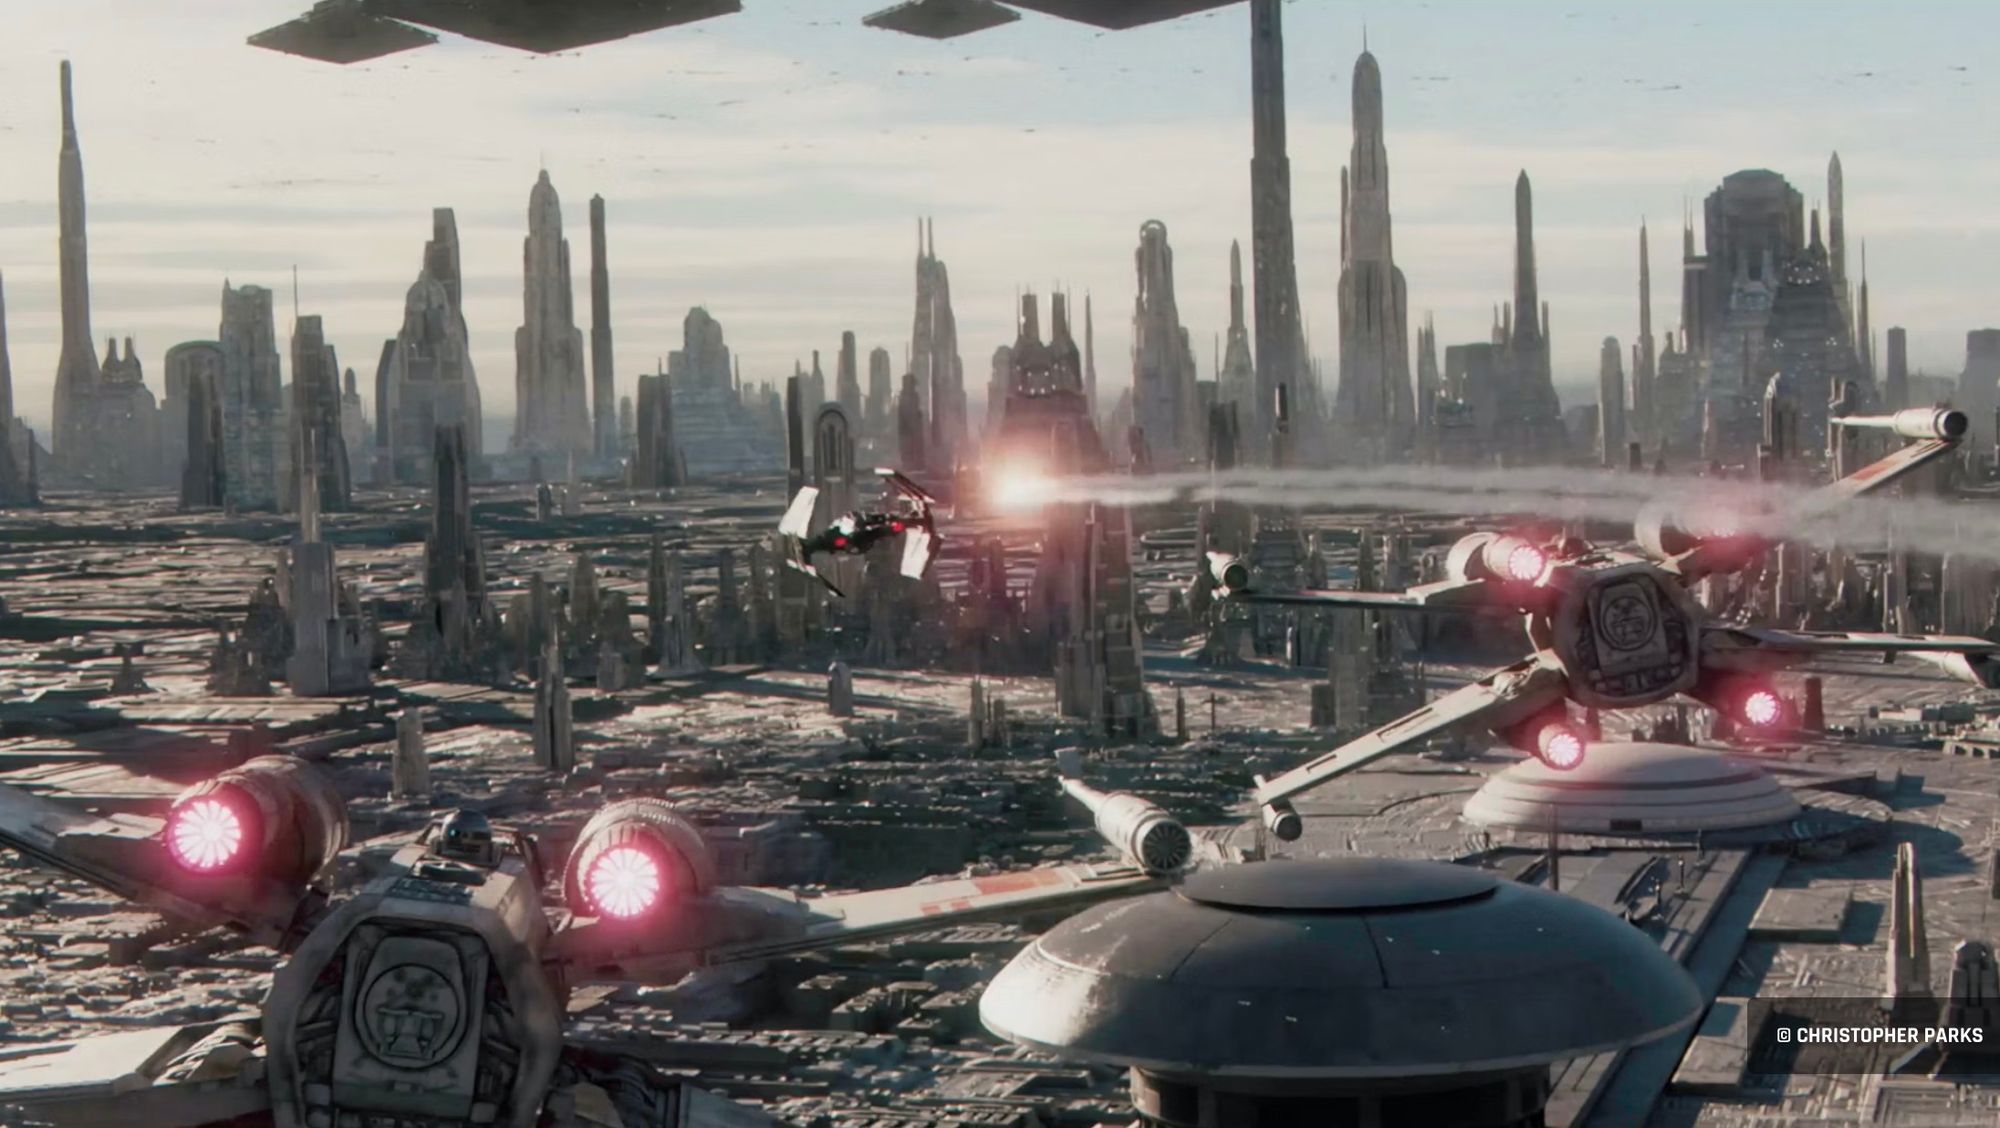 Creating an Aerial Battle Worthy of the Star Wars Universe